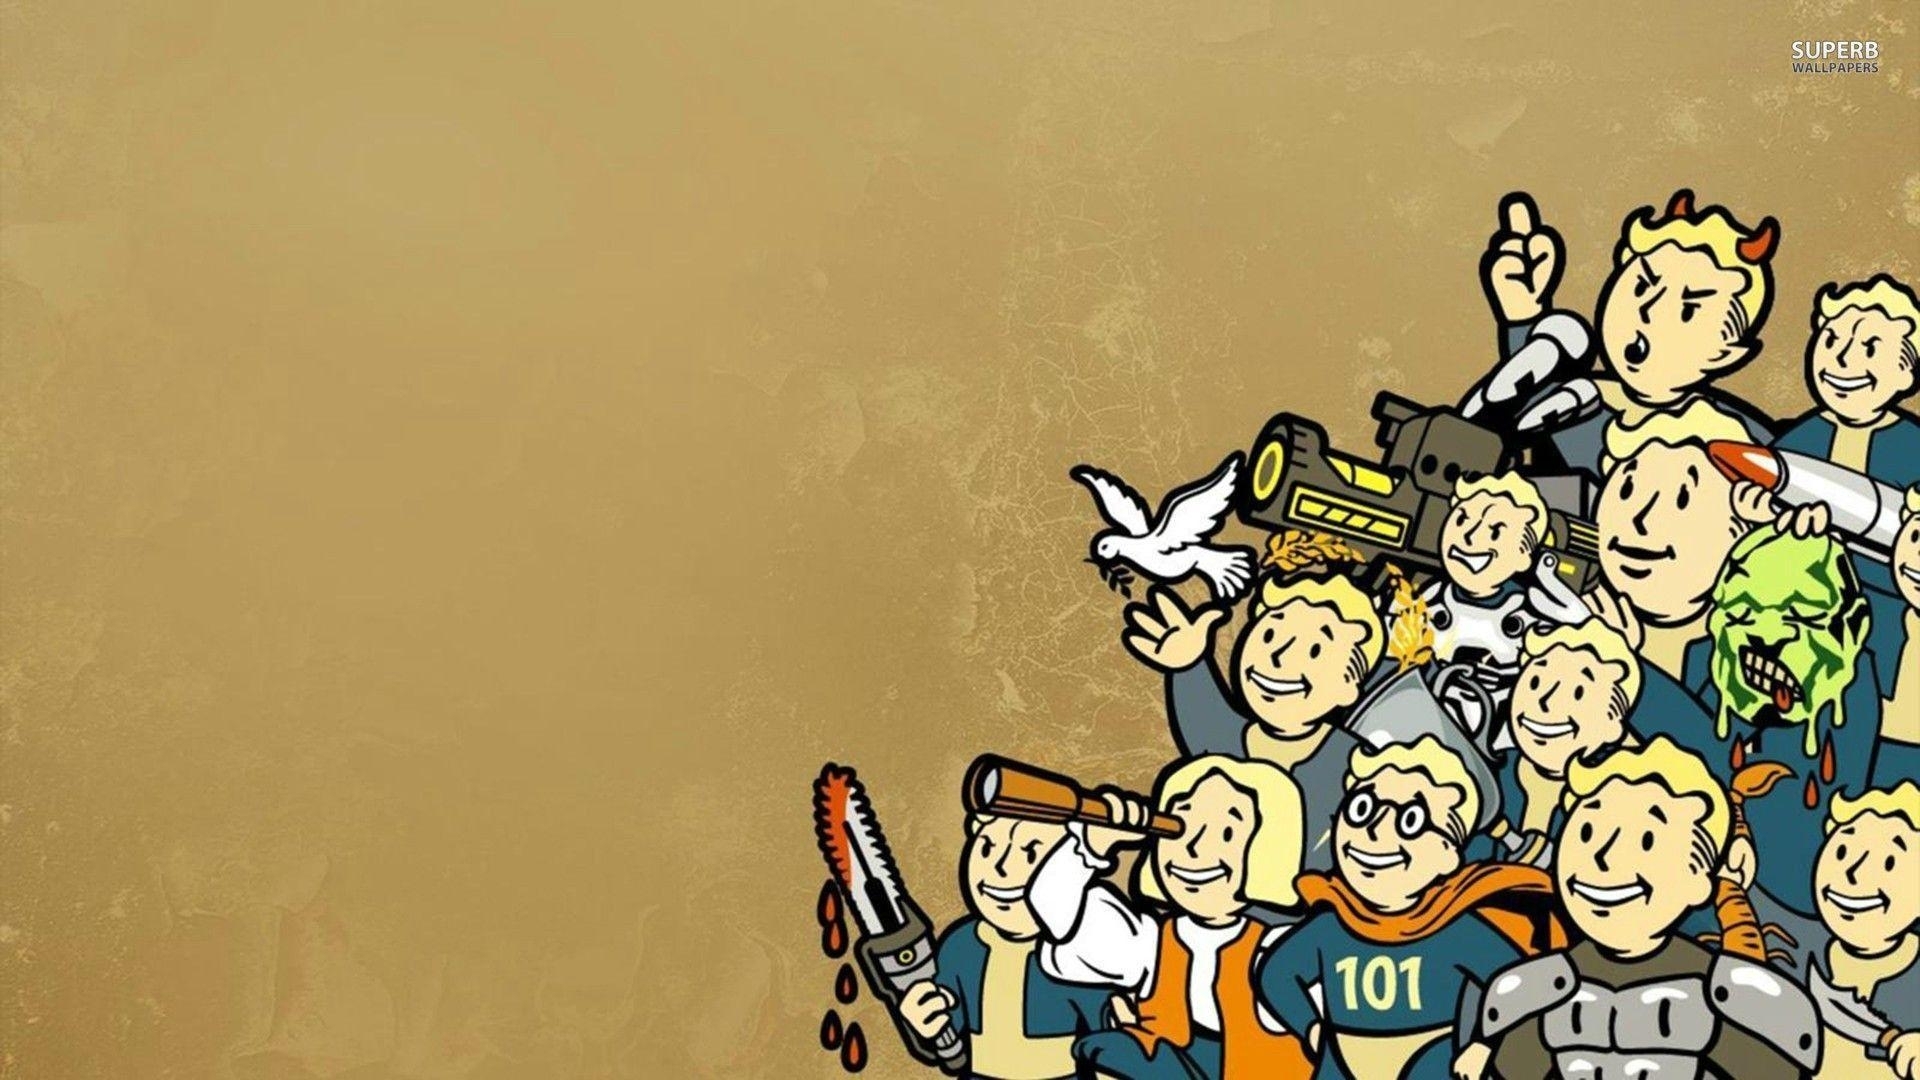 10 Top Fallout 3 Wallpaper Vault Boy FULL HD 1920×1080 For PC Background